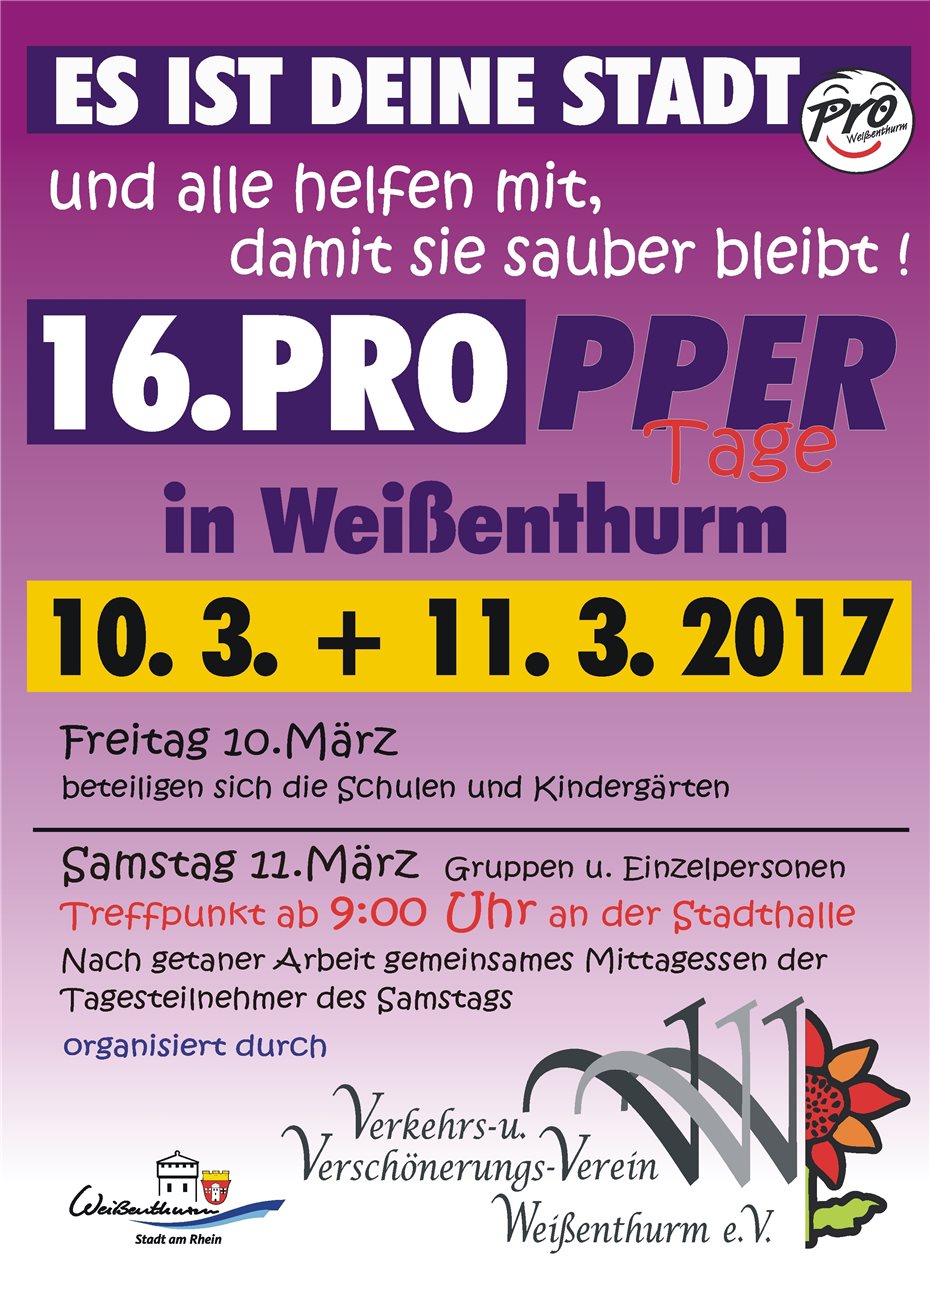 16. Proppertage